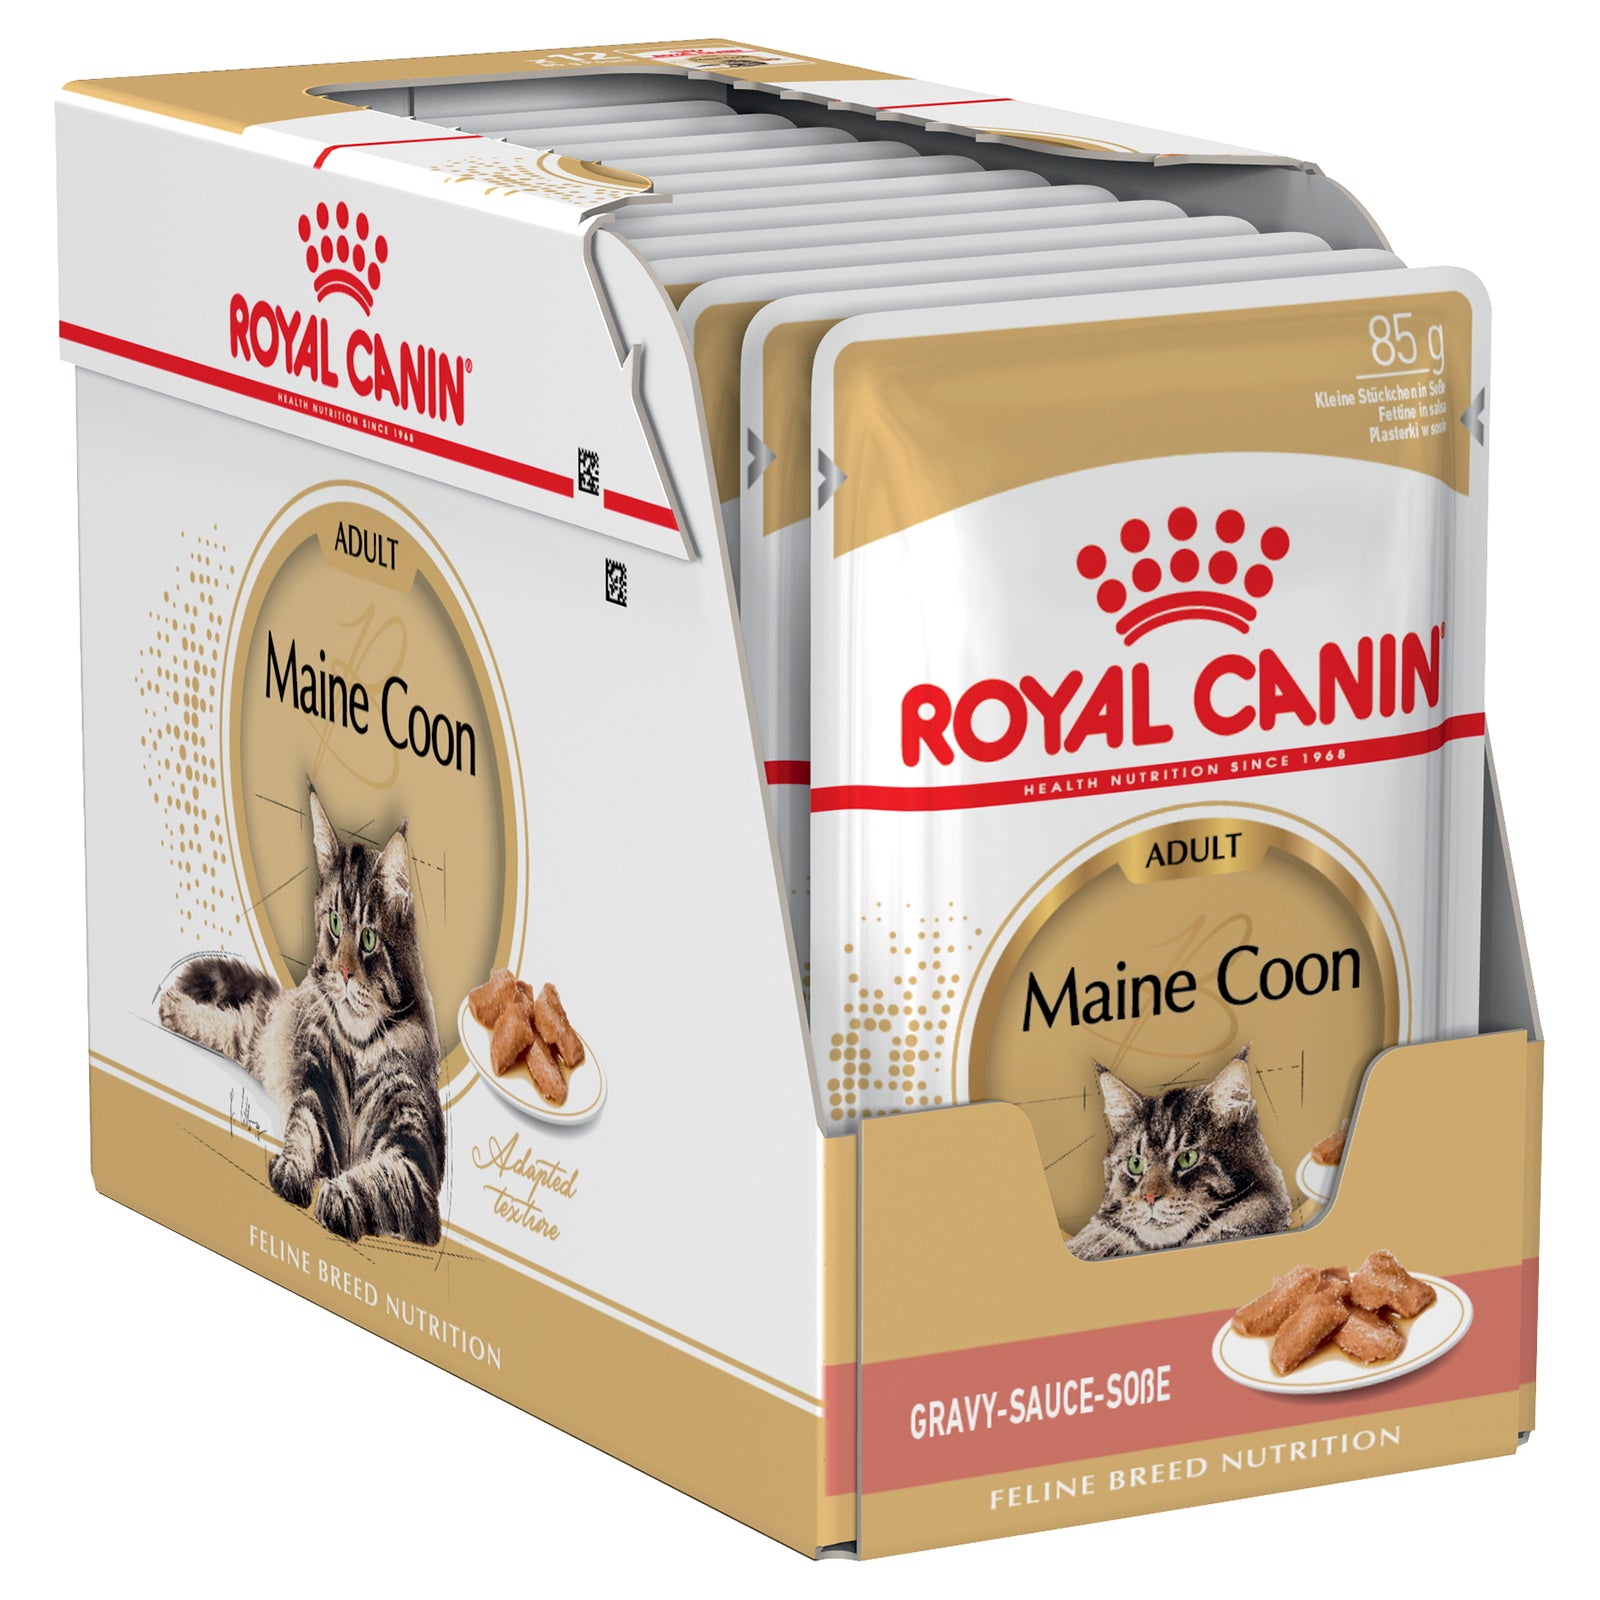 Royal Canin Cat Food Pouch Adult Maine Coon in Gravy